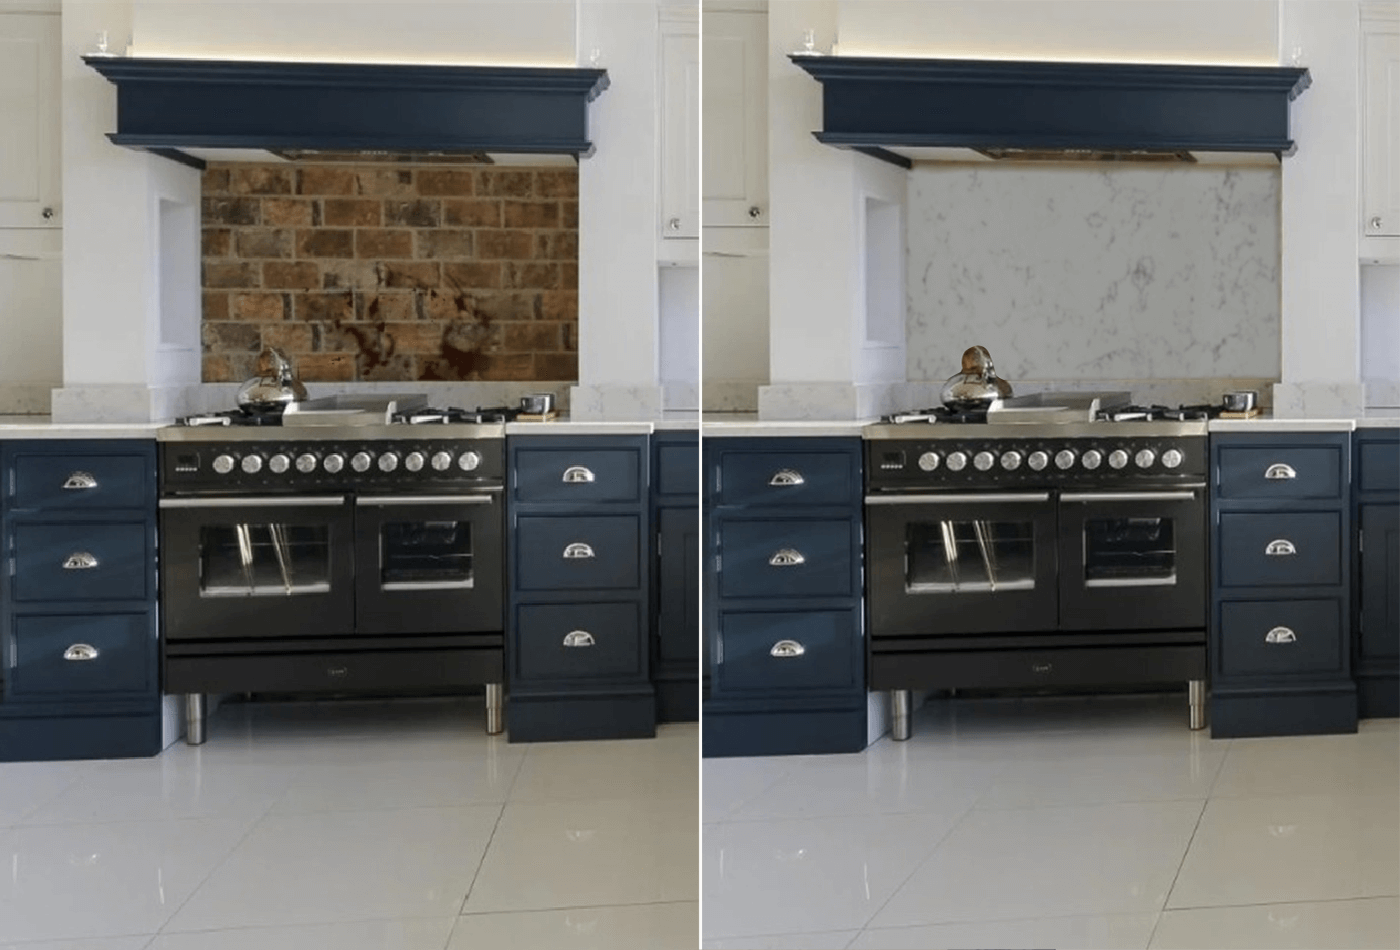 With and without backsplash